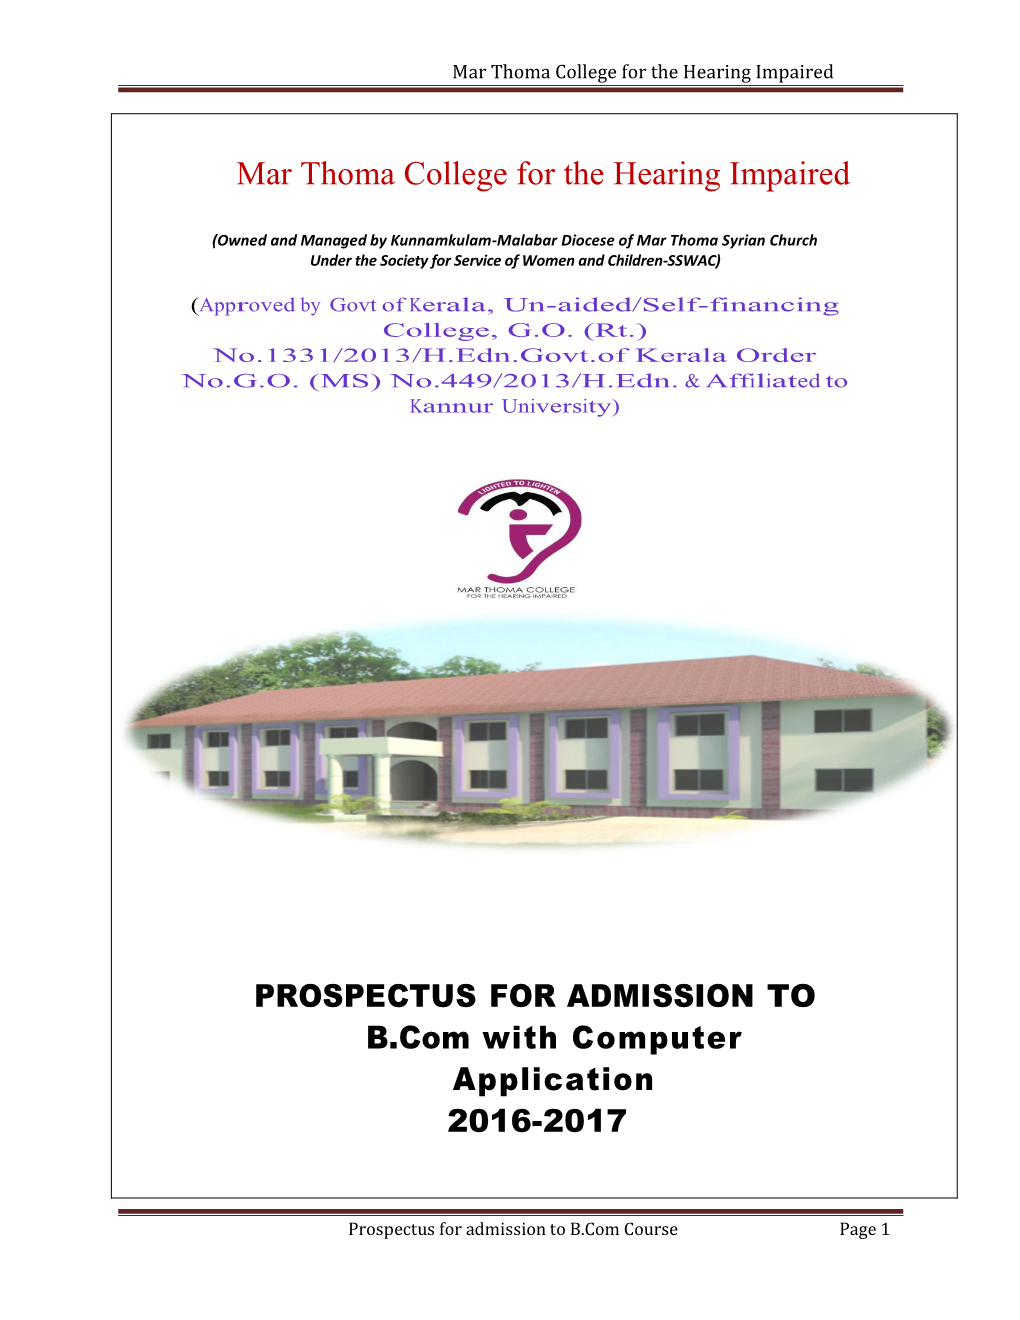 Mar Thoma College for the Hearing Impaired